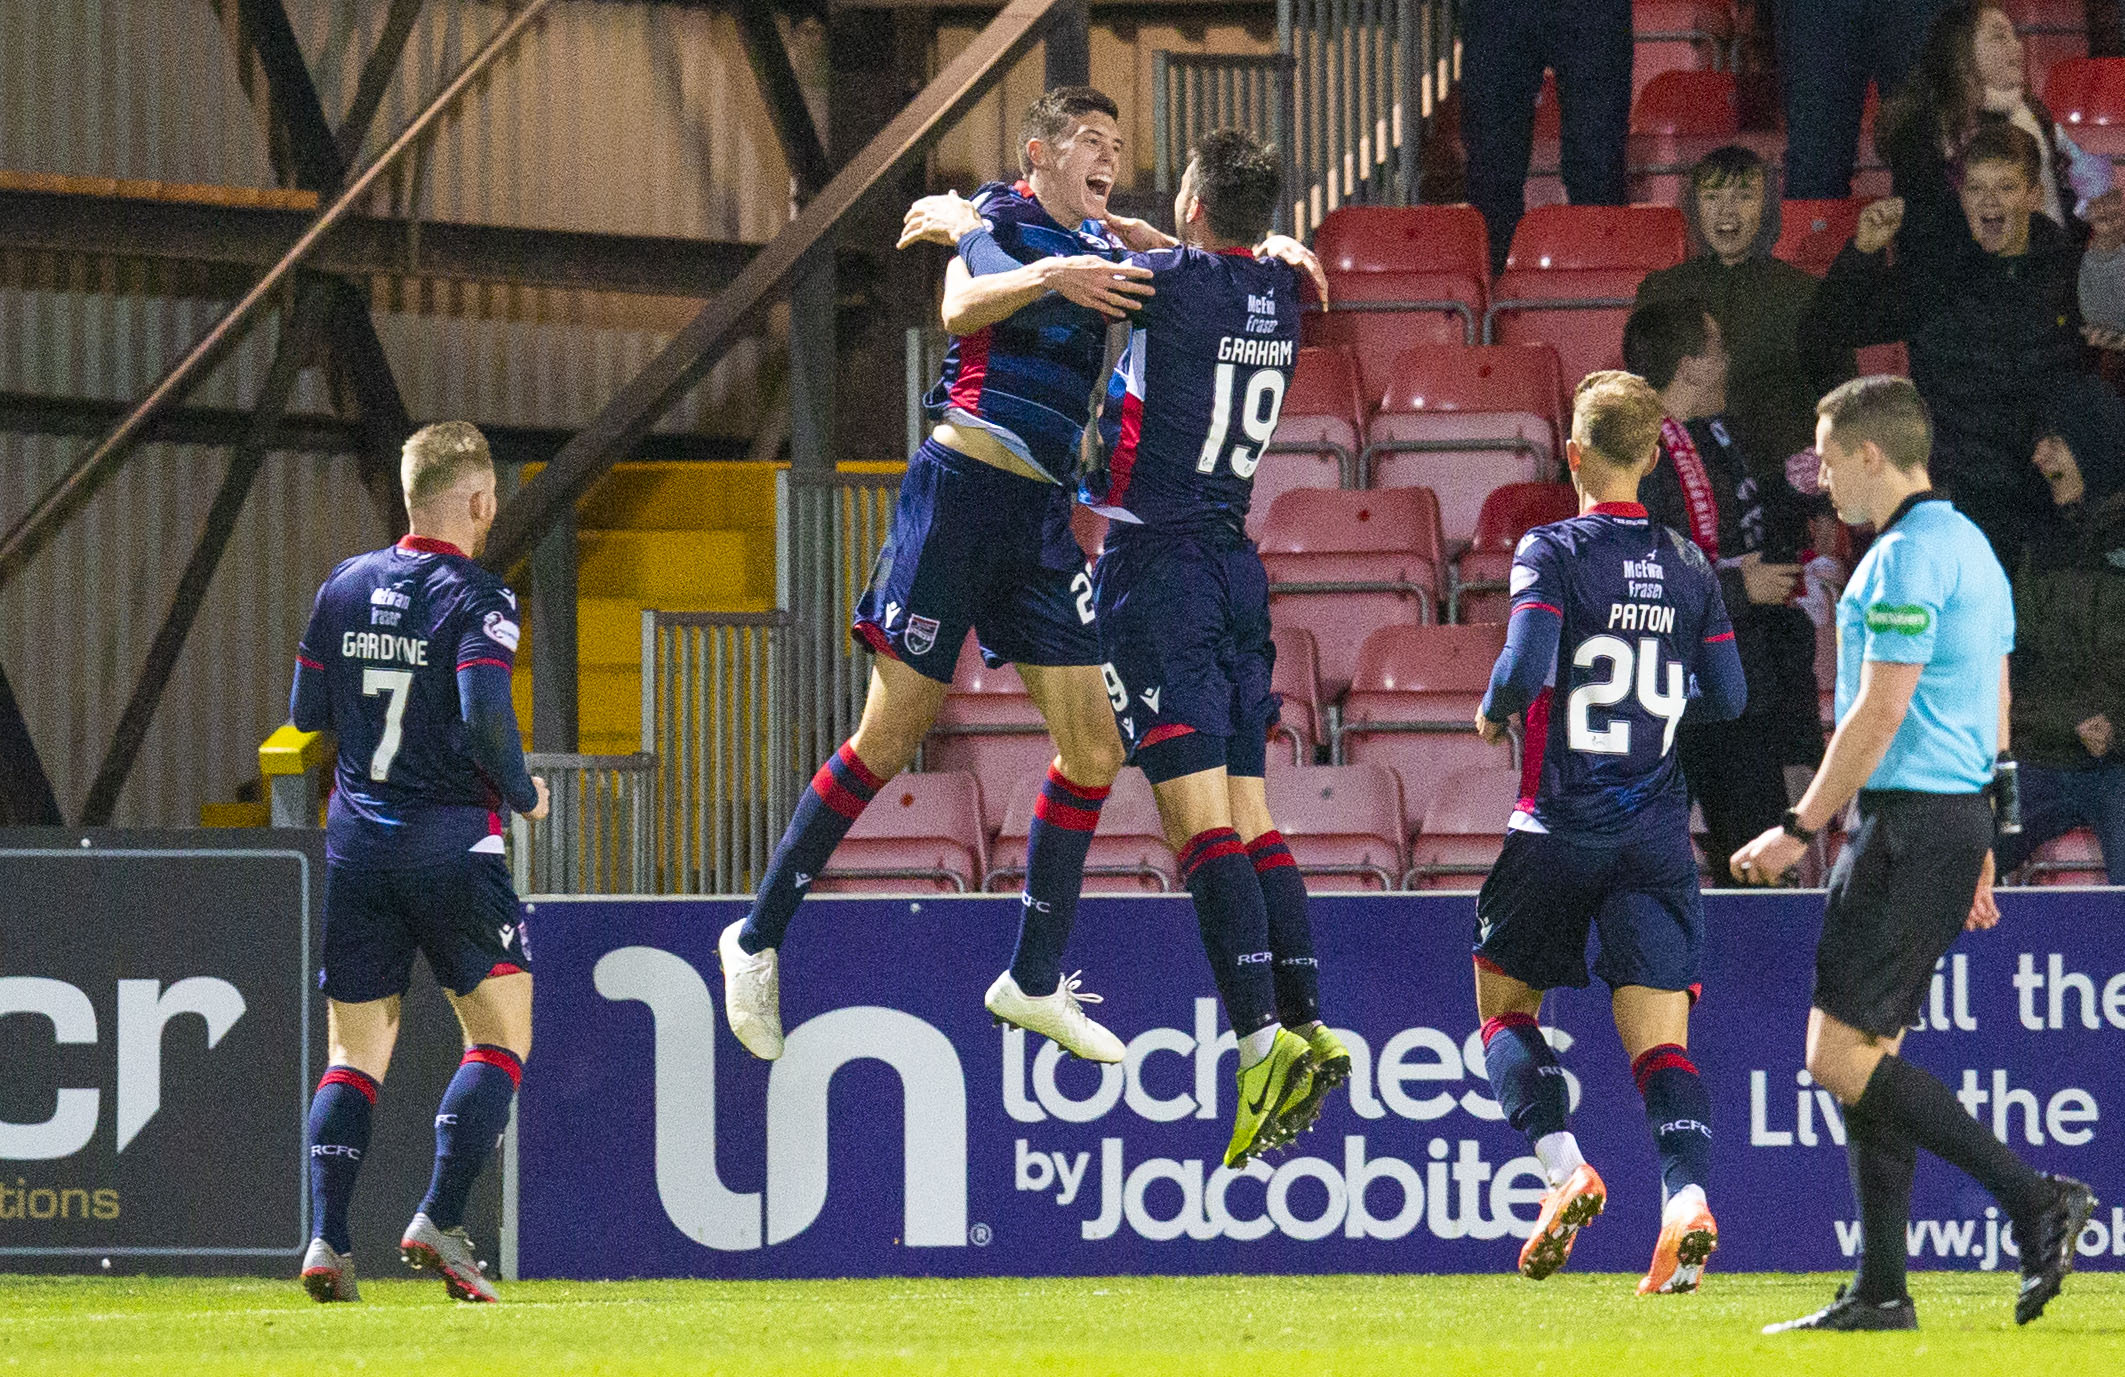 Ross Stewart celebrates scoring with his Ross County teammates.